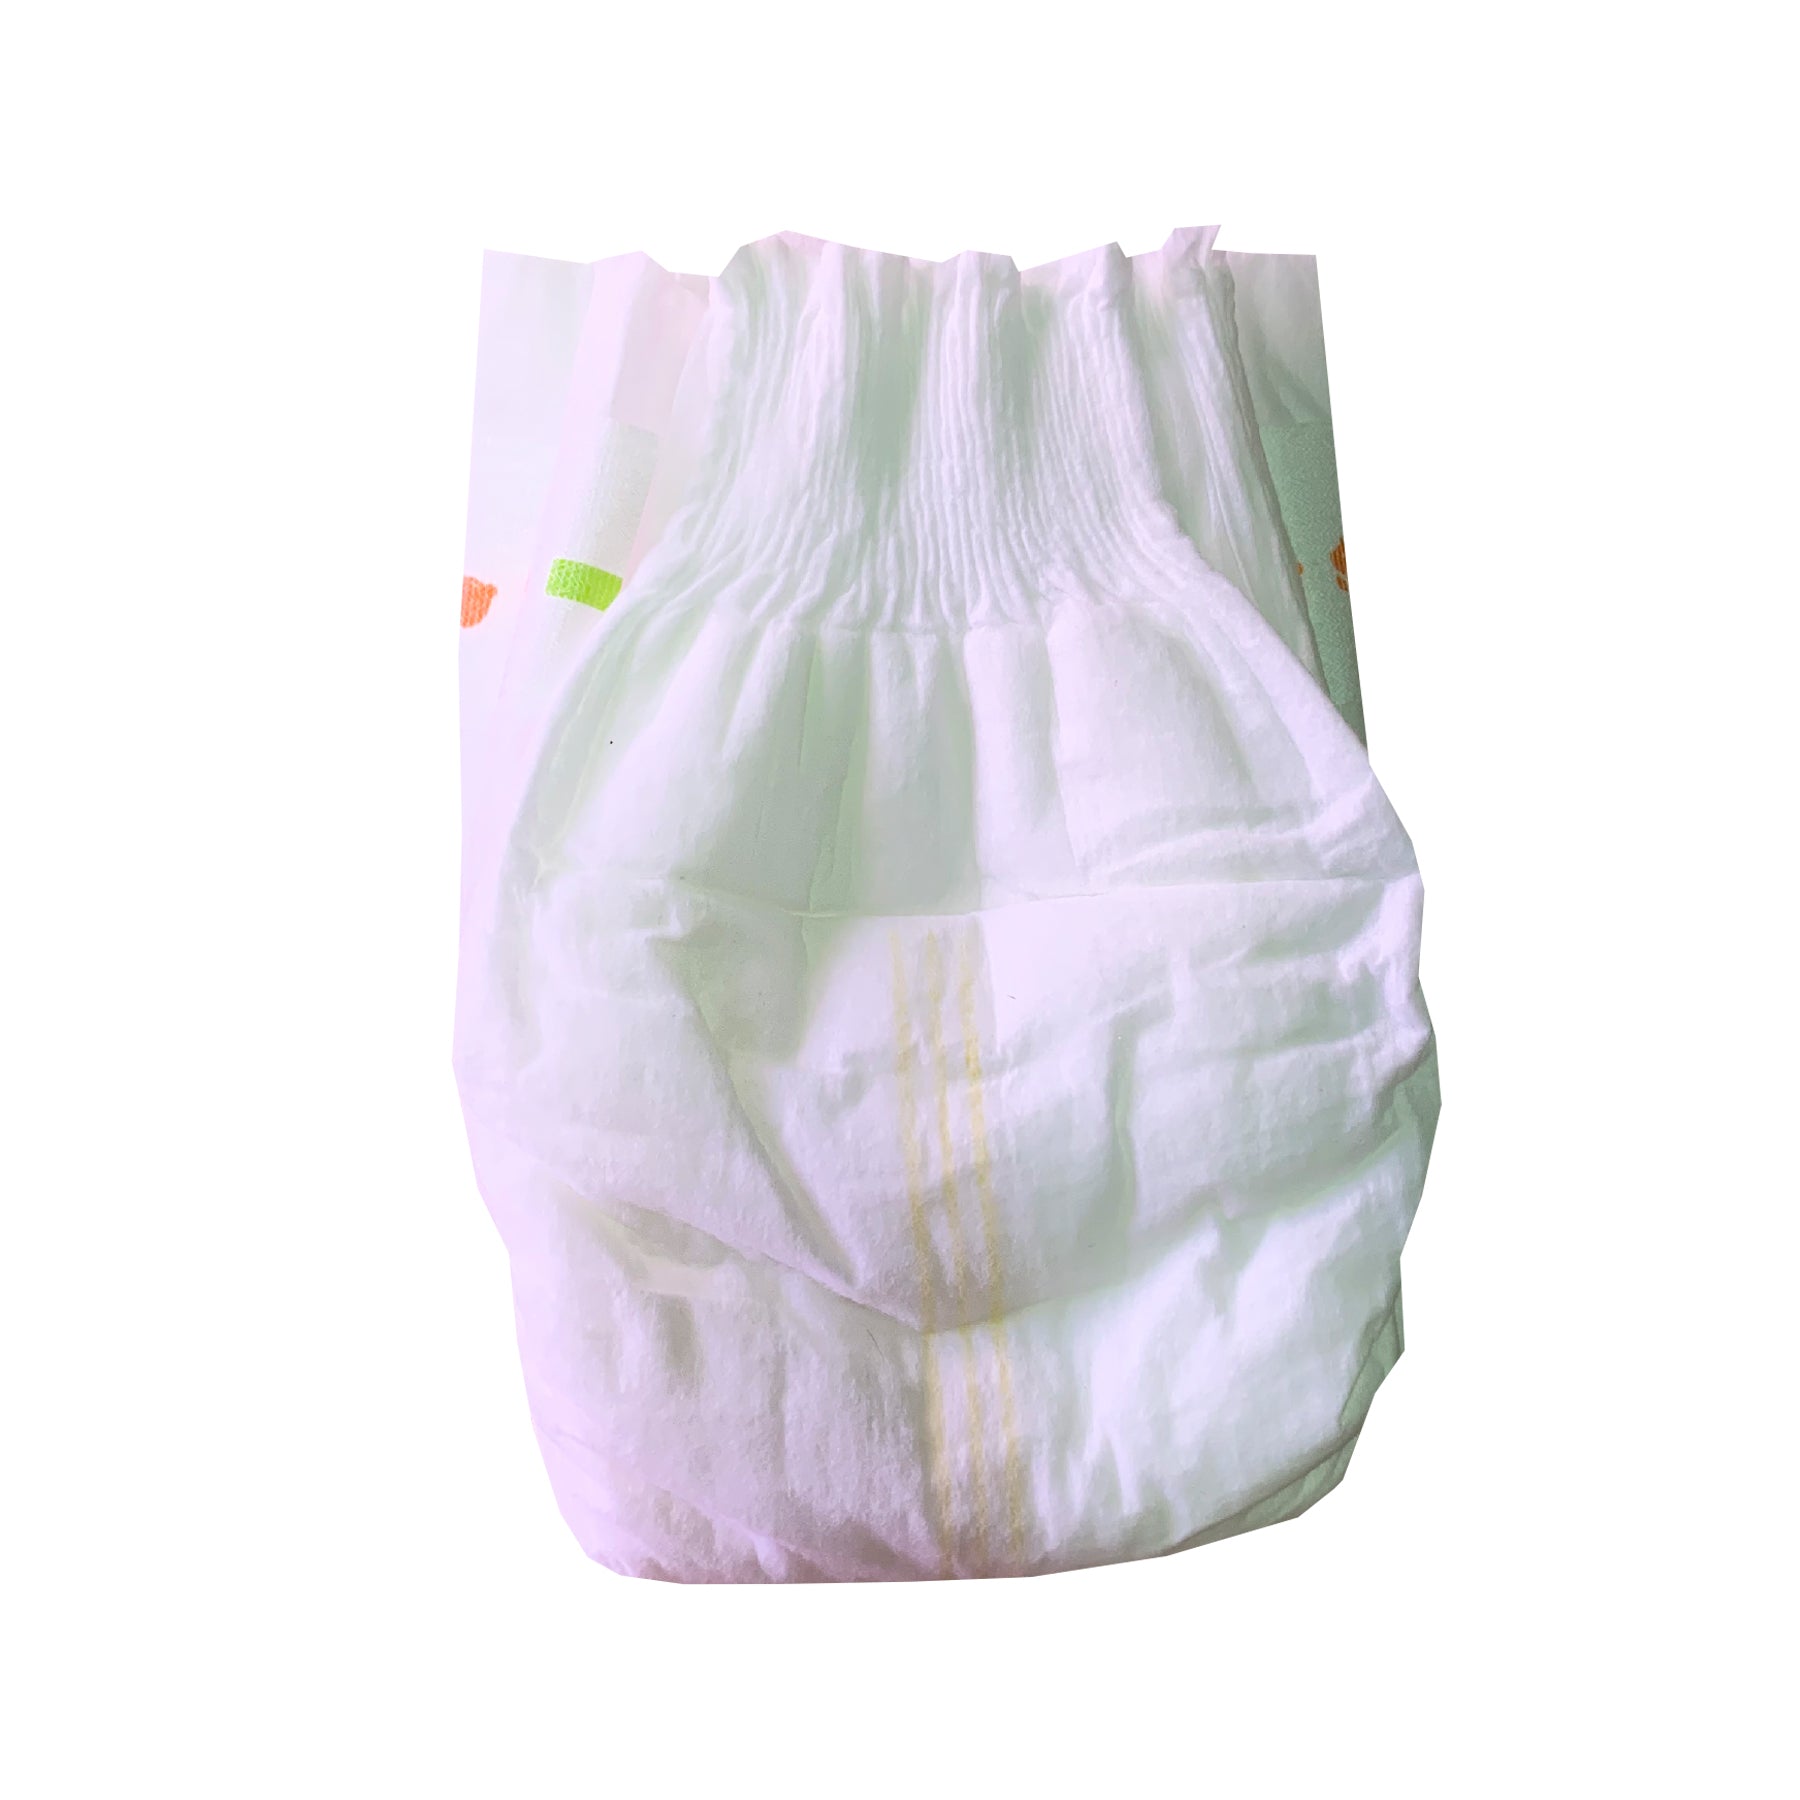 s size diapers